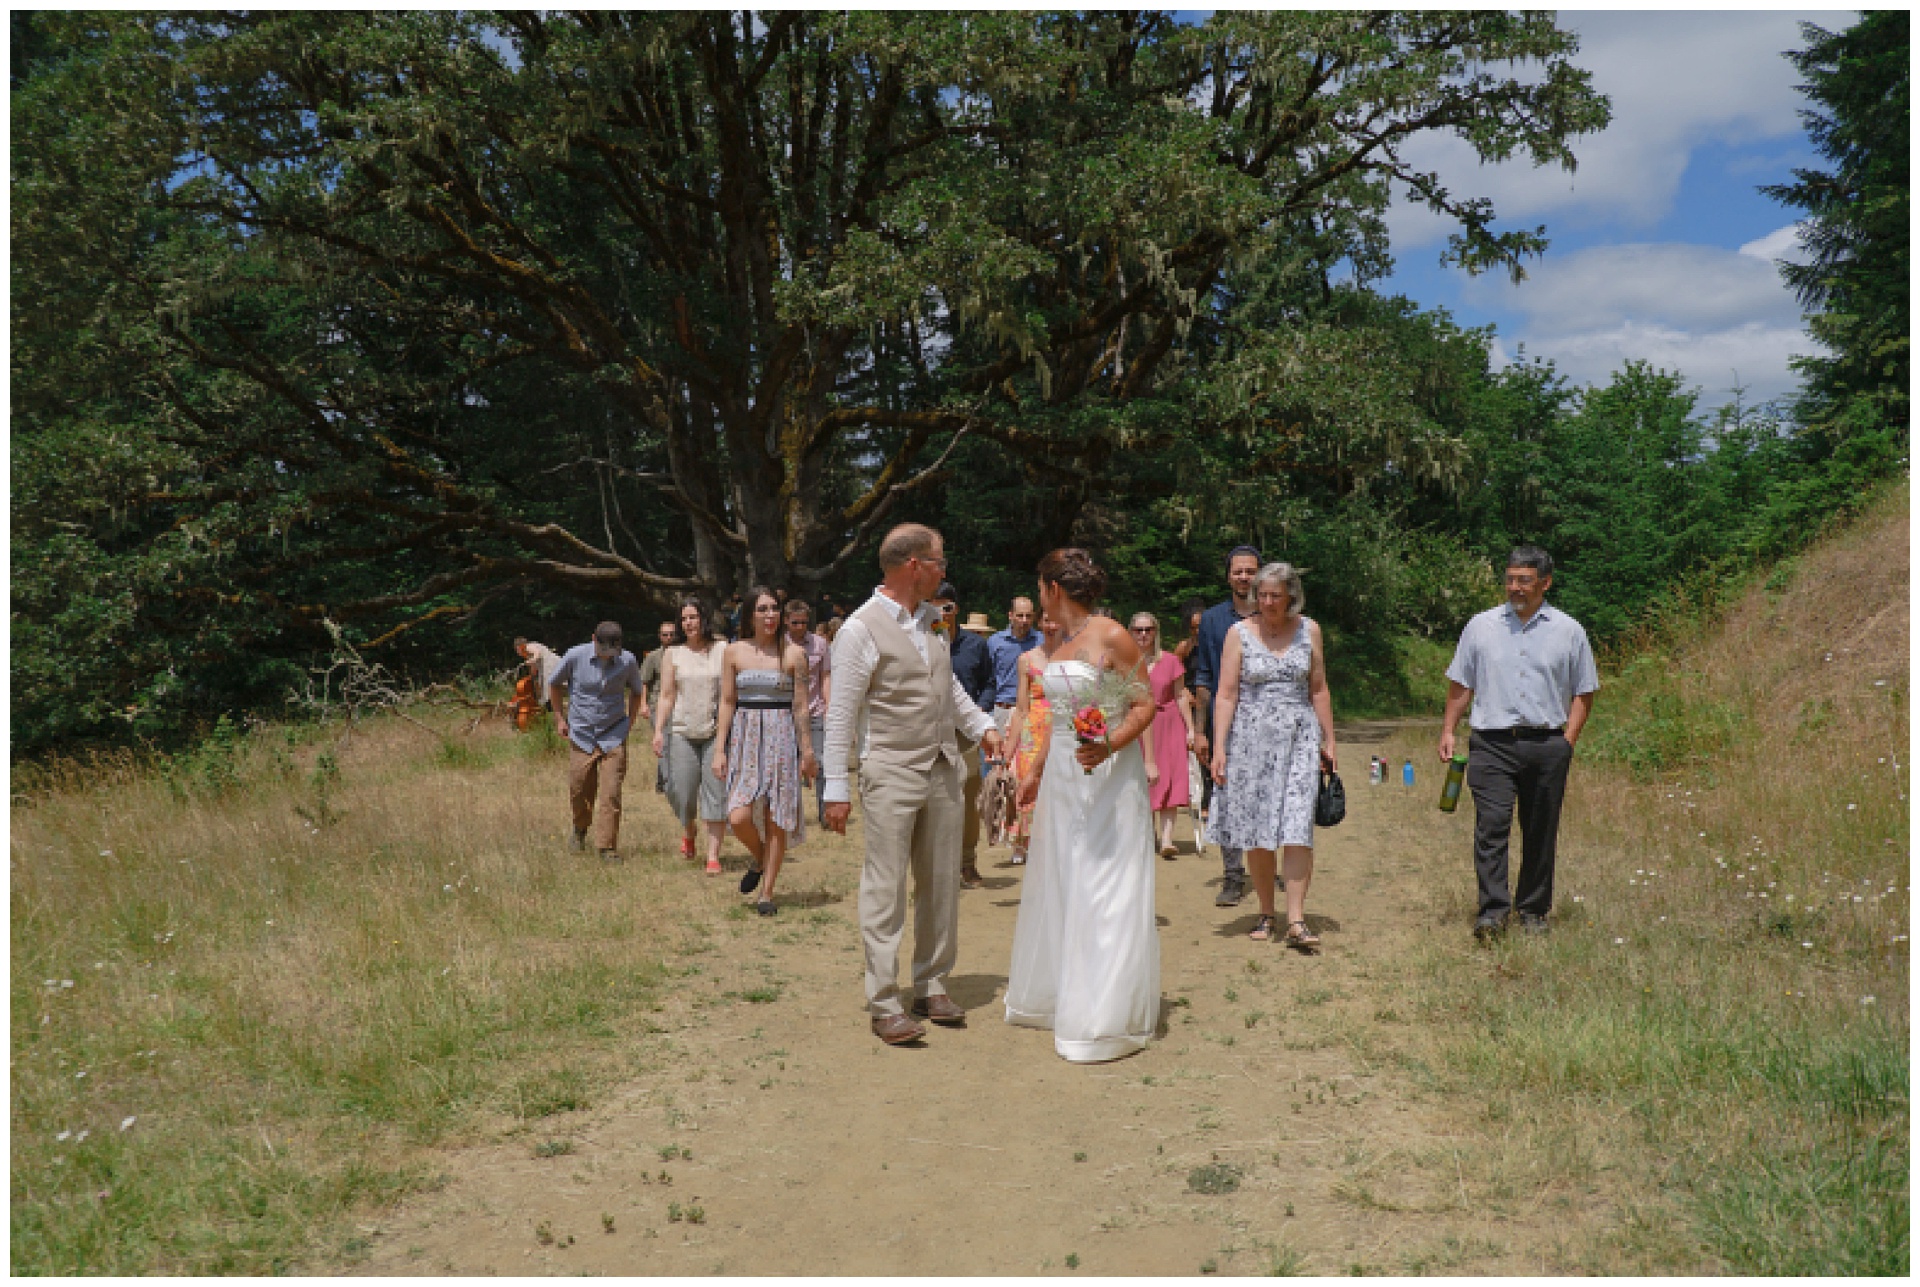 Bride and groom lead their guests along a mountain path.